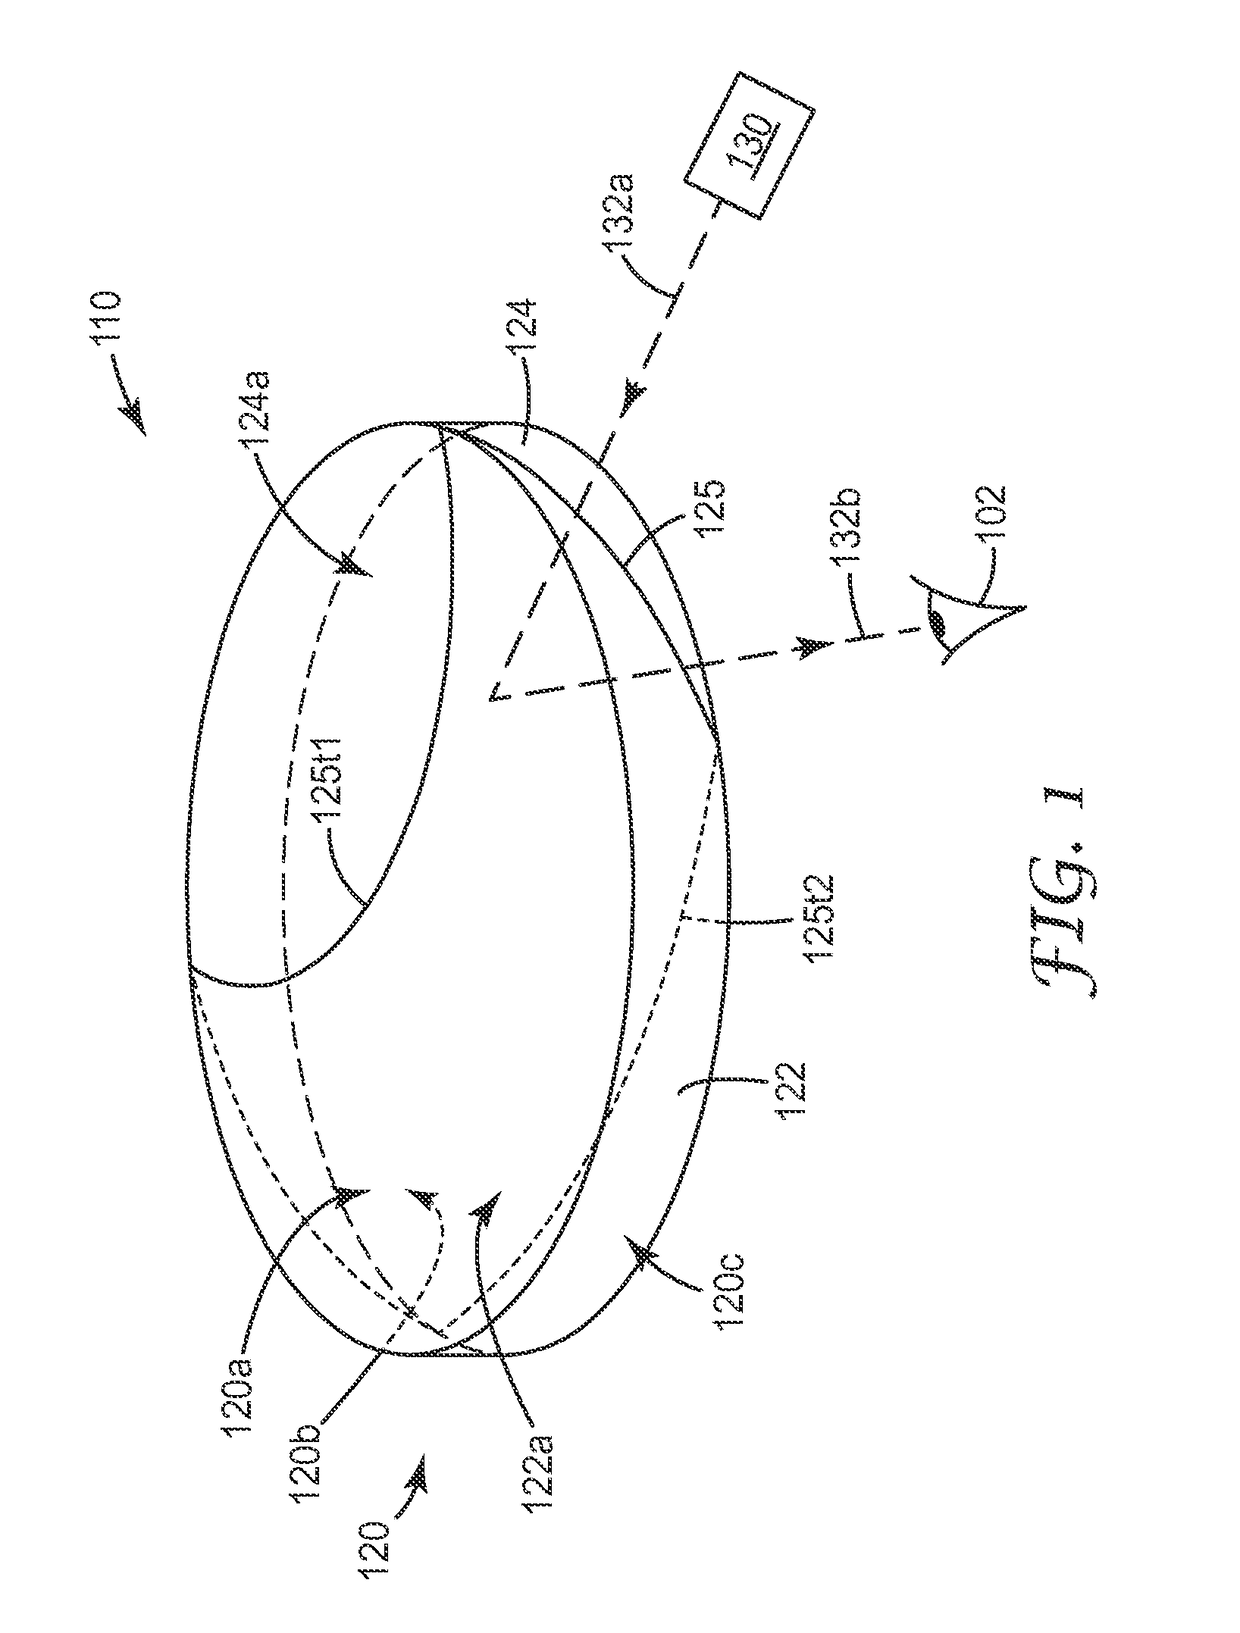 Lens with embedded multilayer optical film for near-eye display systems